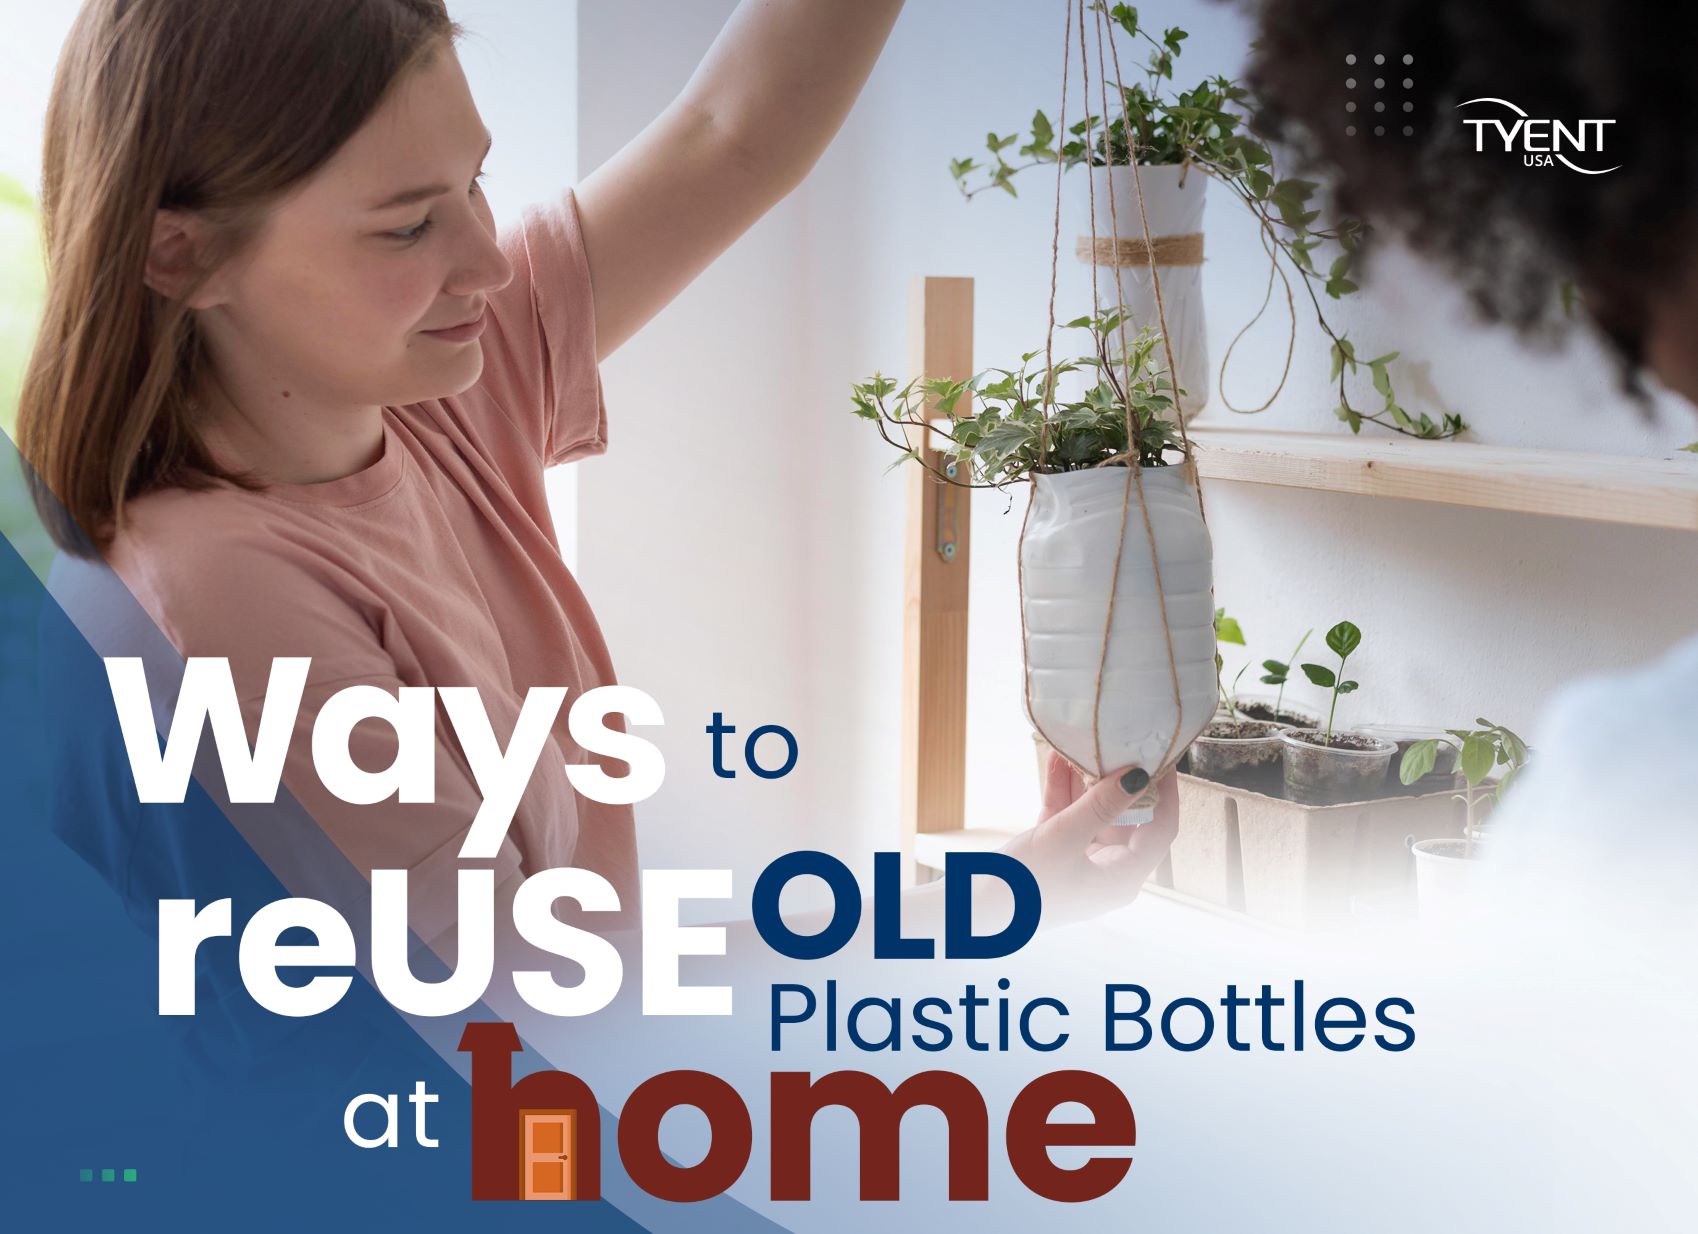 Ways to reuse old plastic bottles at home